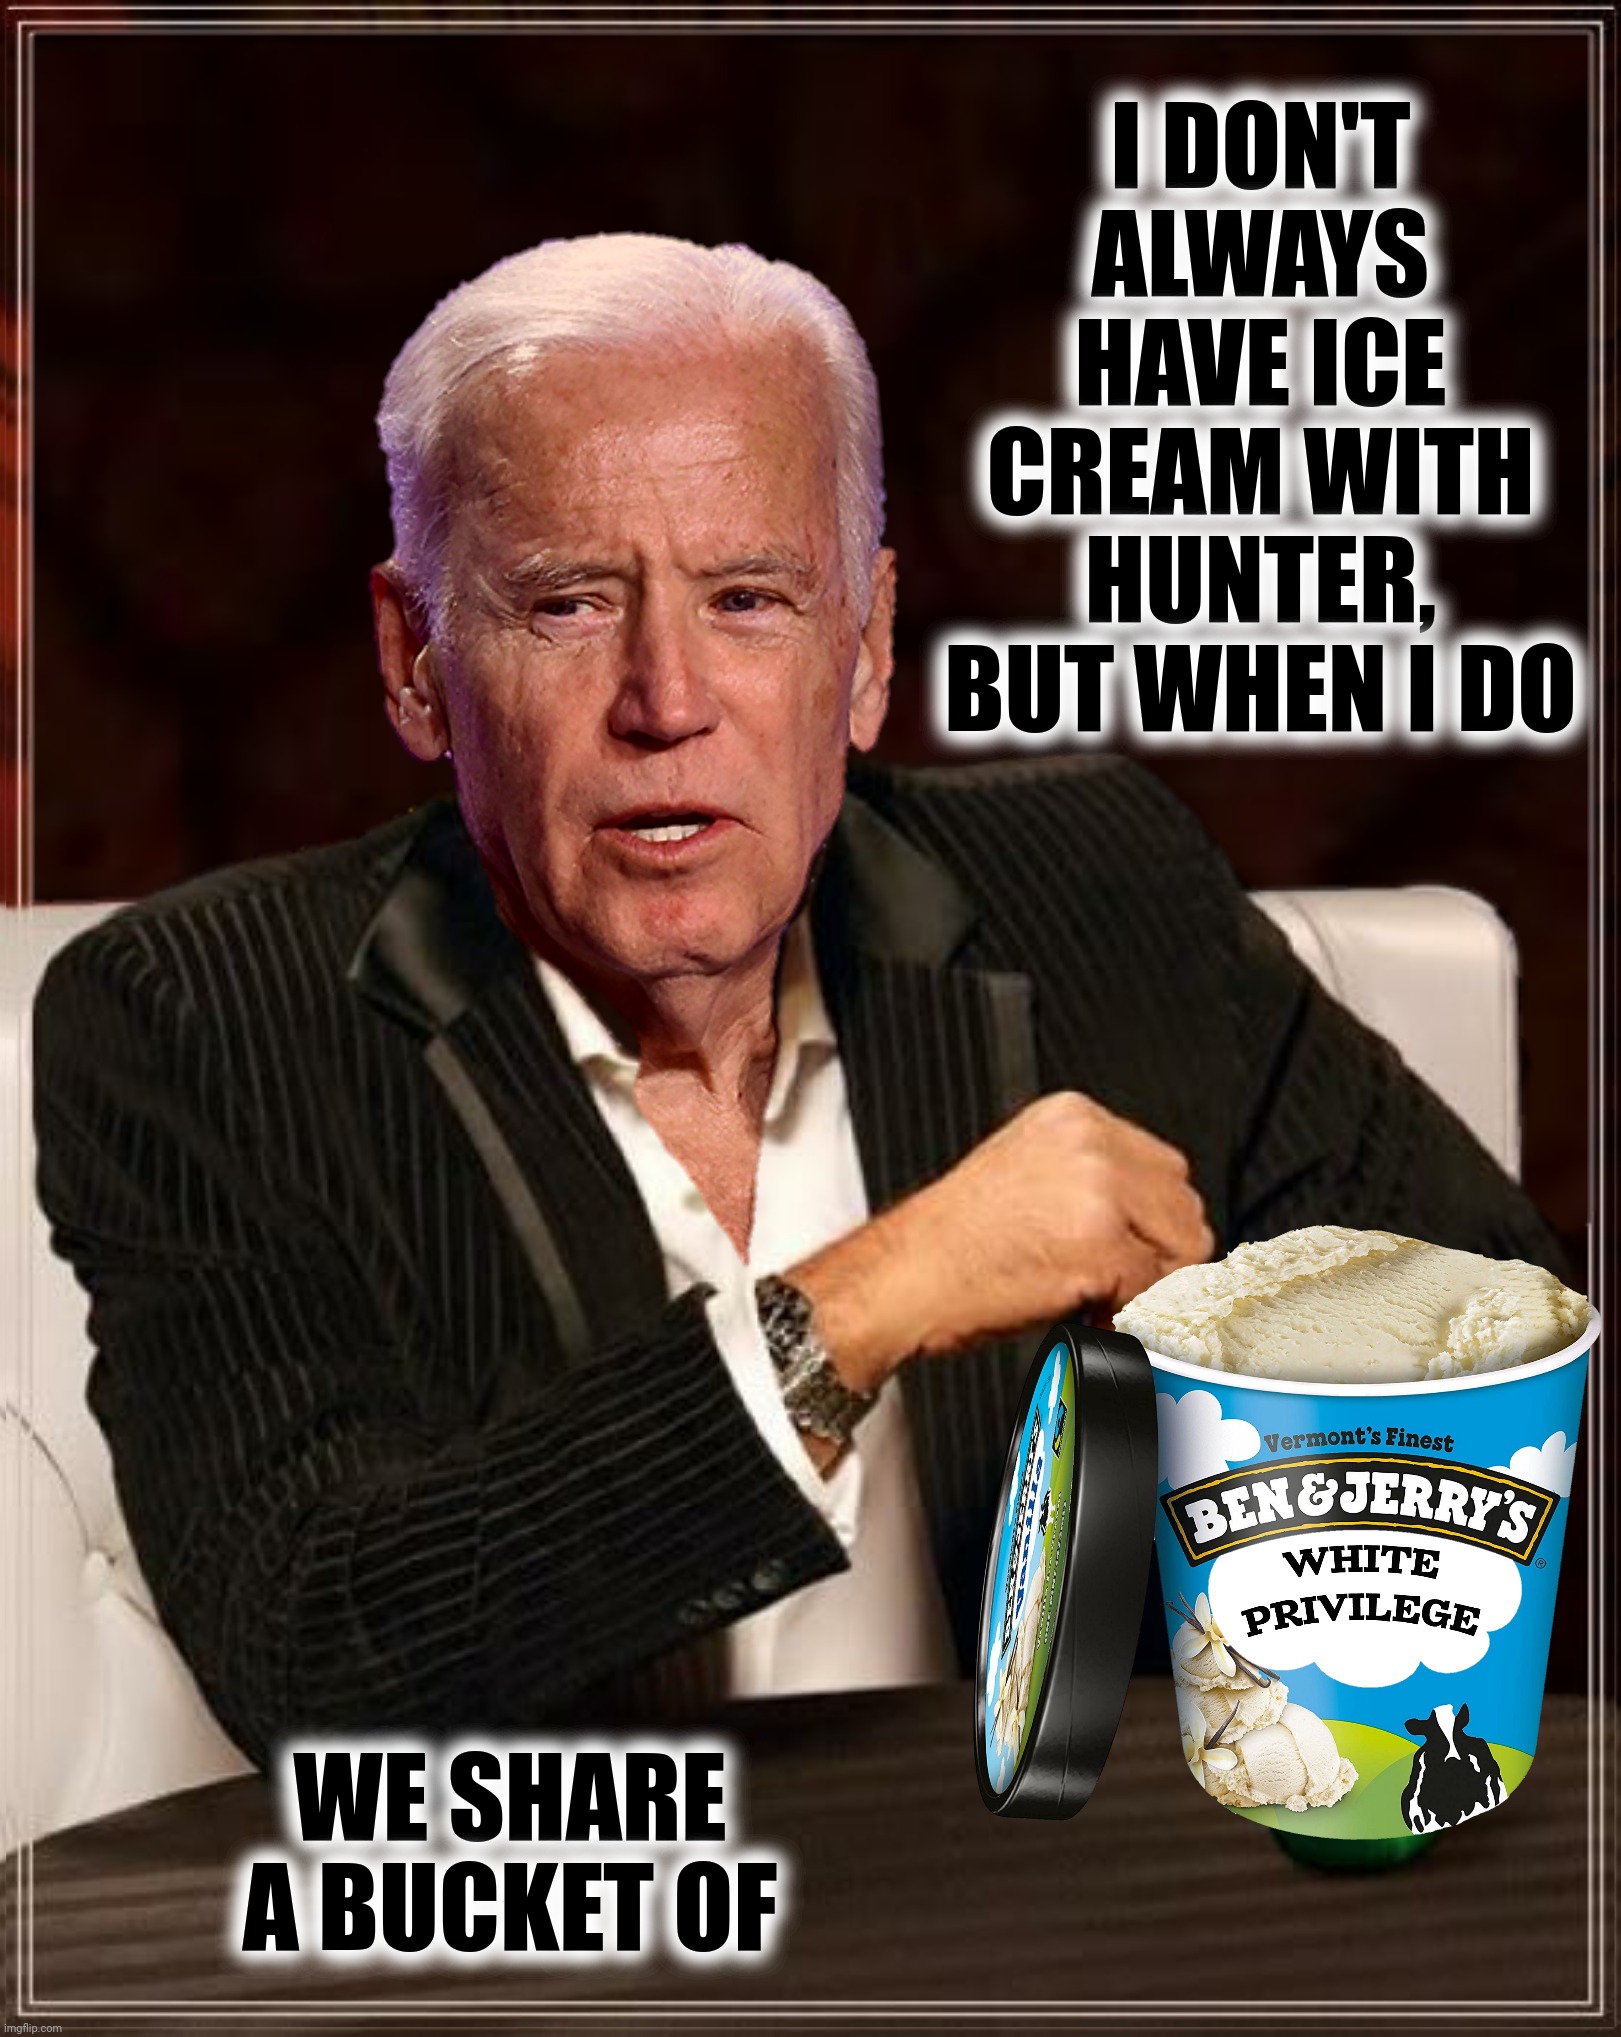 I DON'T ALWAYS HAVE ICE CREAM WITH HUNTER, BUT WHEN I DO WE SHARE A BUCKET OF | made w/ Imgflip meme maker